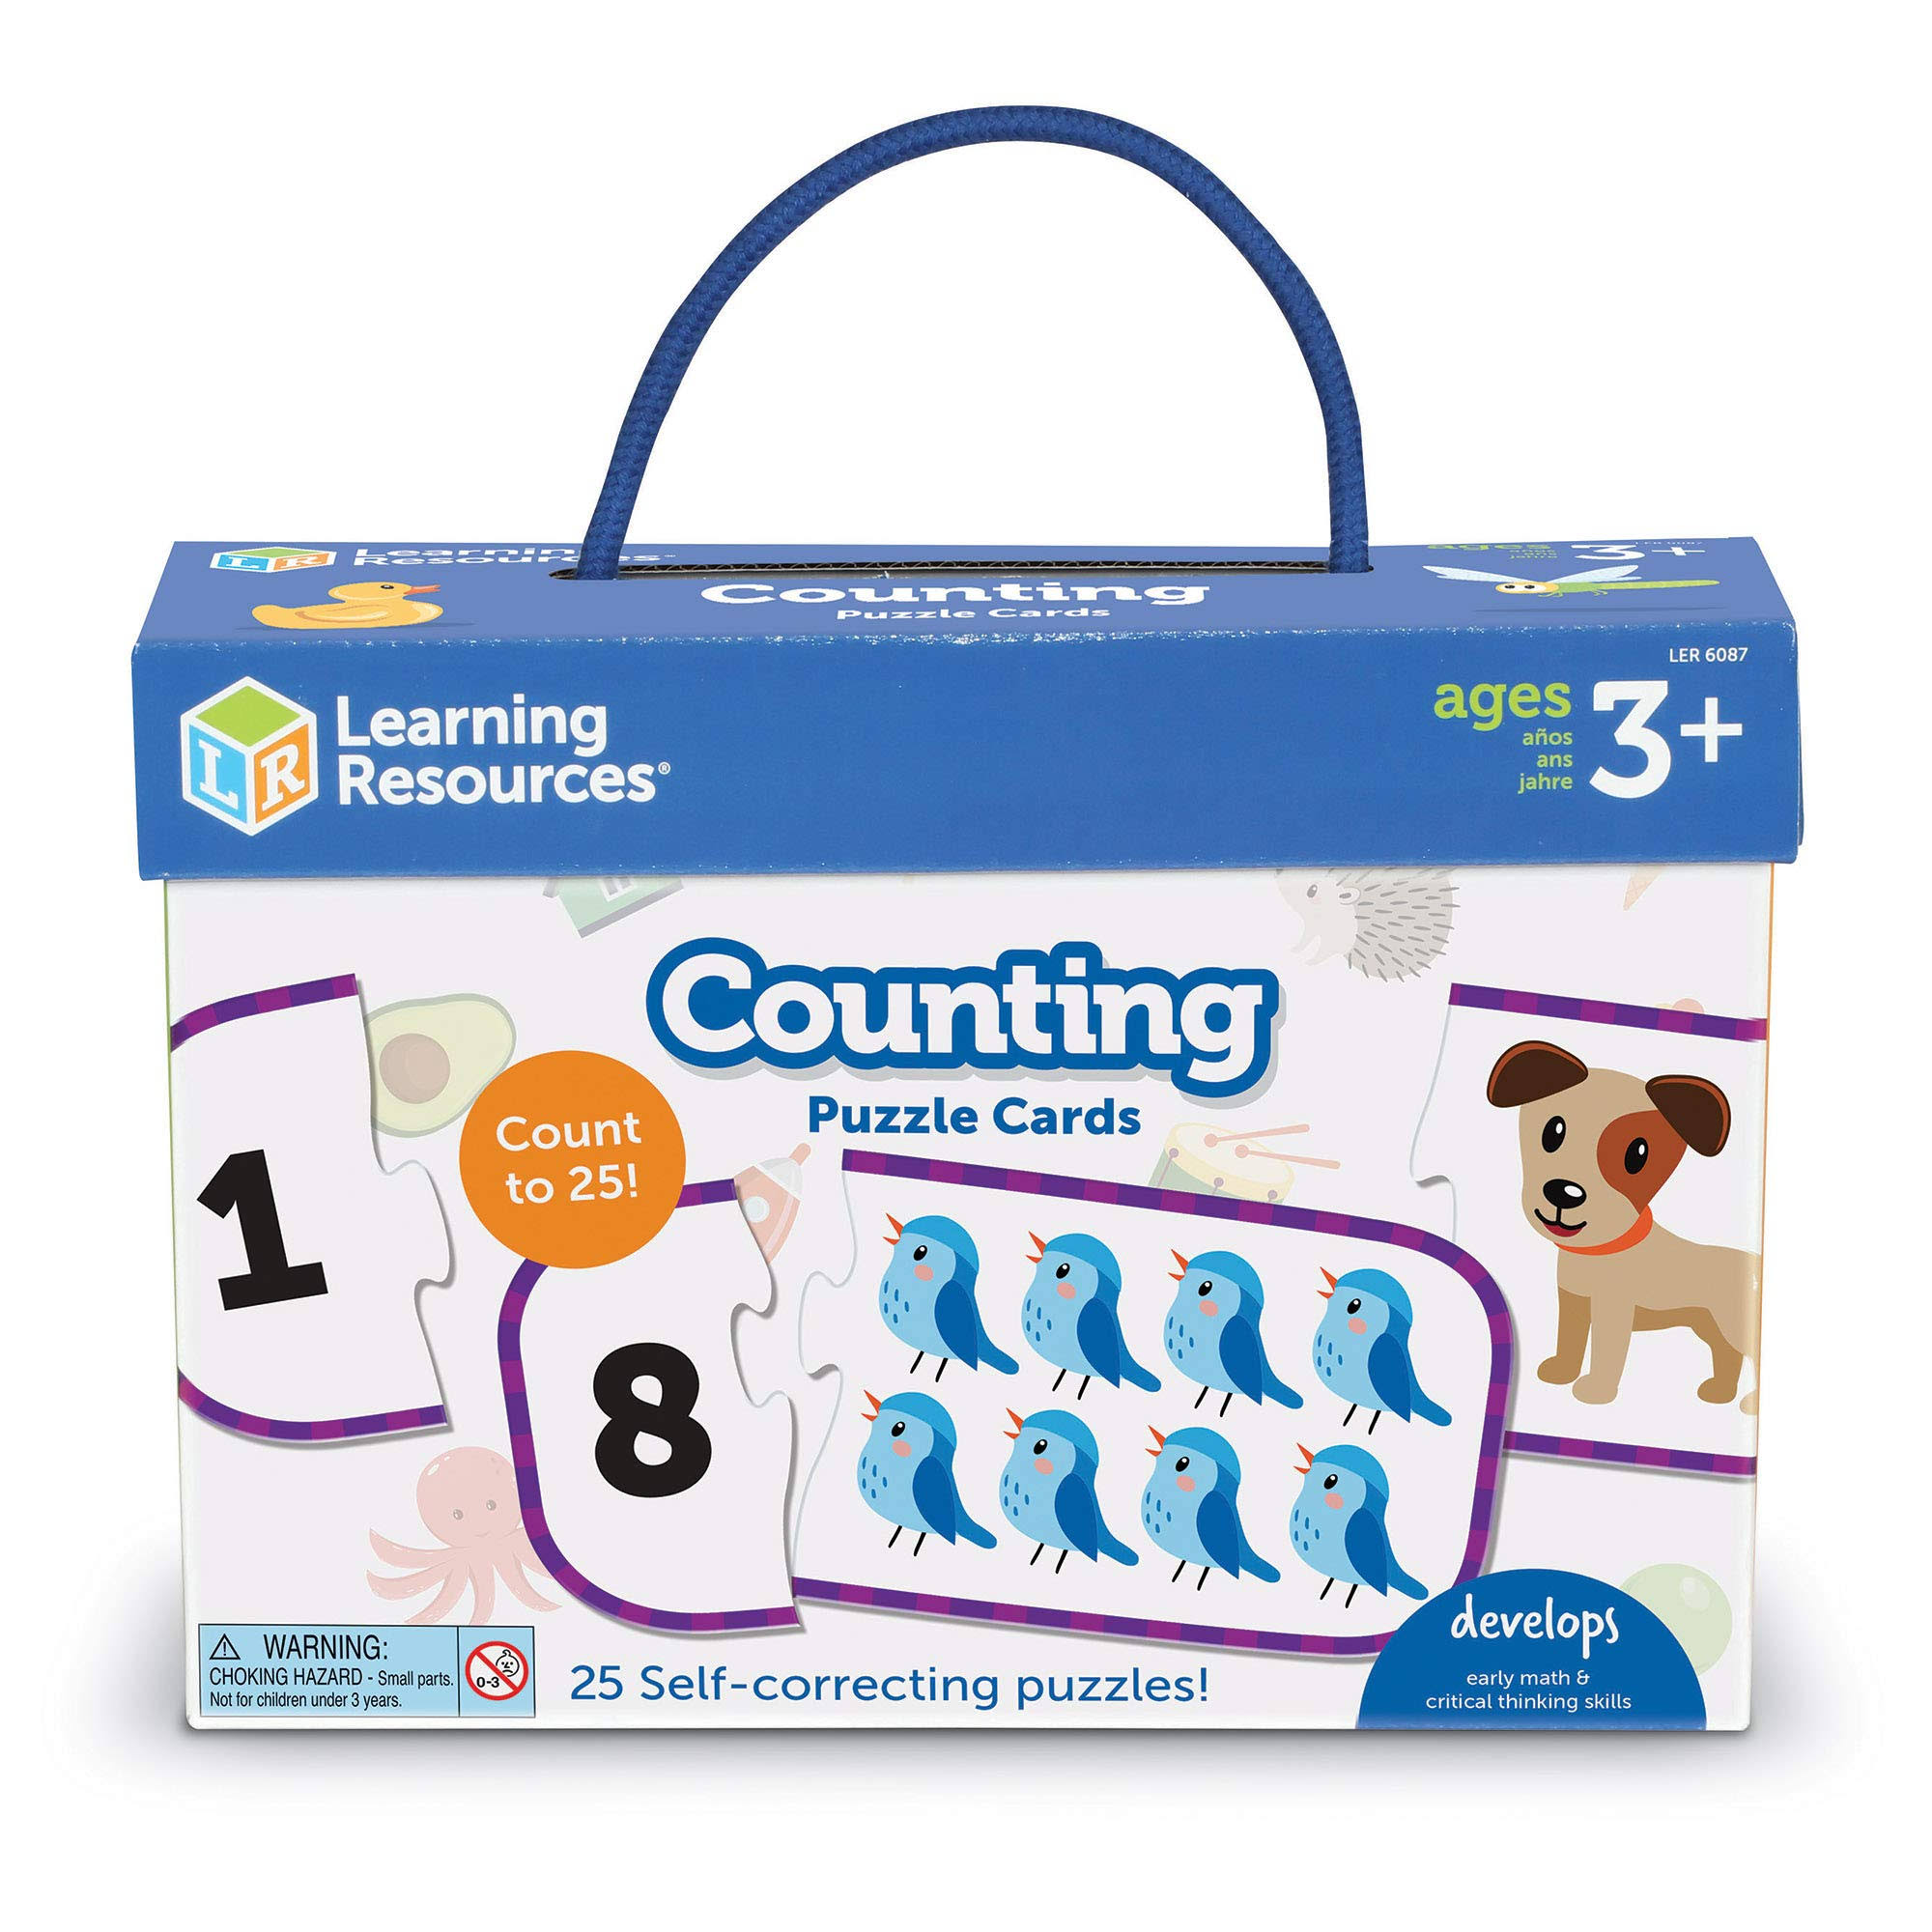 Learning Resources Counting Puzzle Cards | LER6087